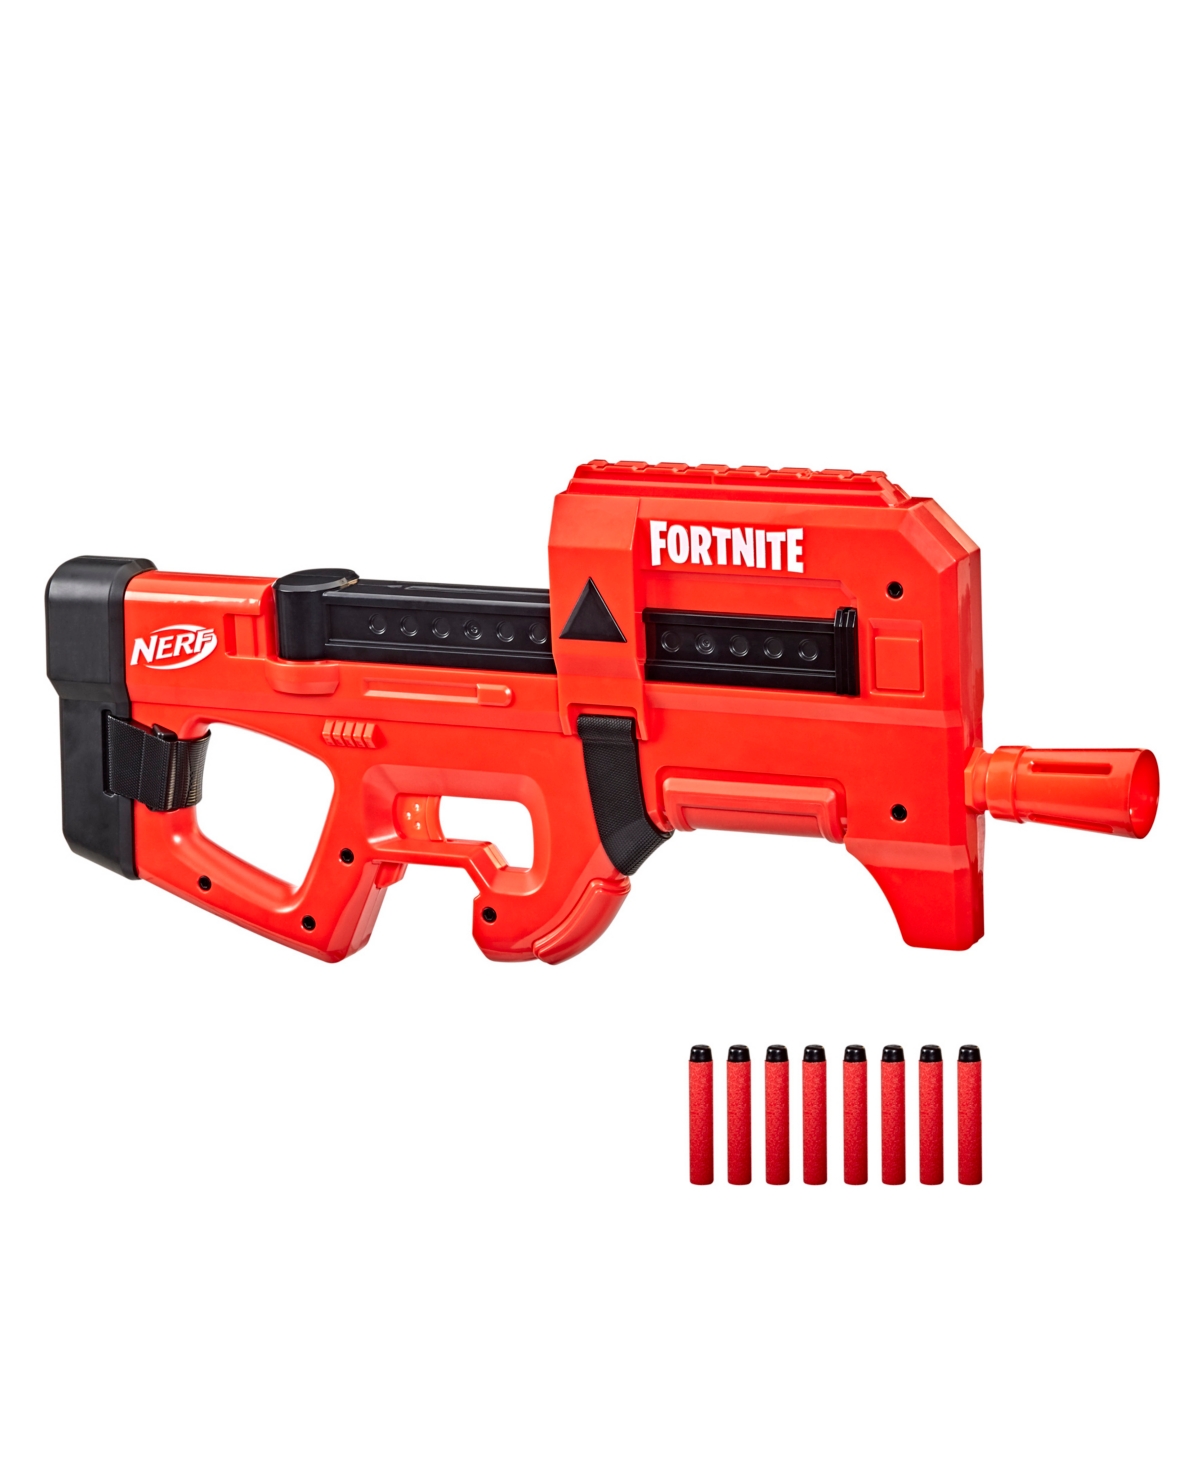 Nerf Fortnite Compact Smg | Shop Your Way: Online Shopping & Earn ...